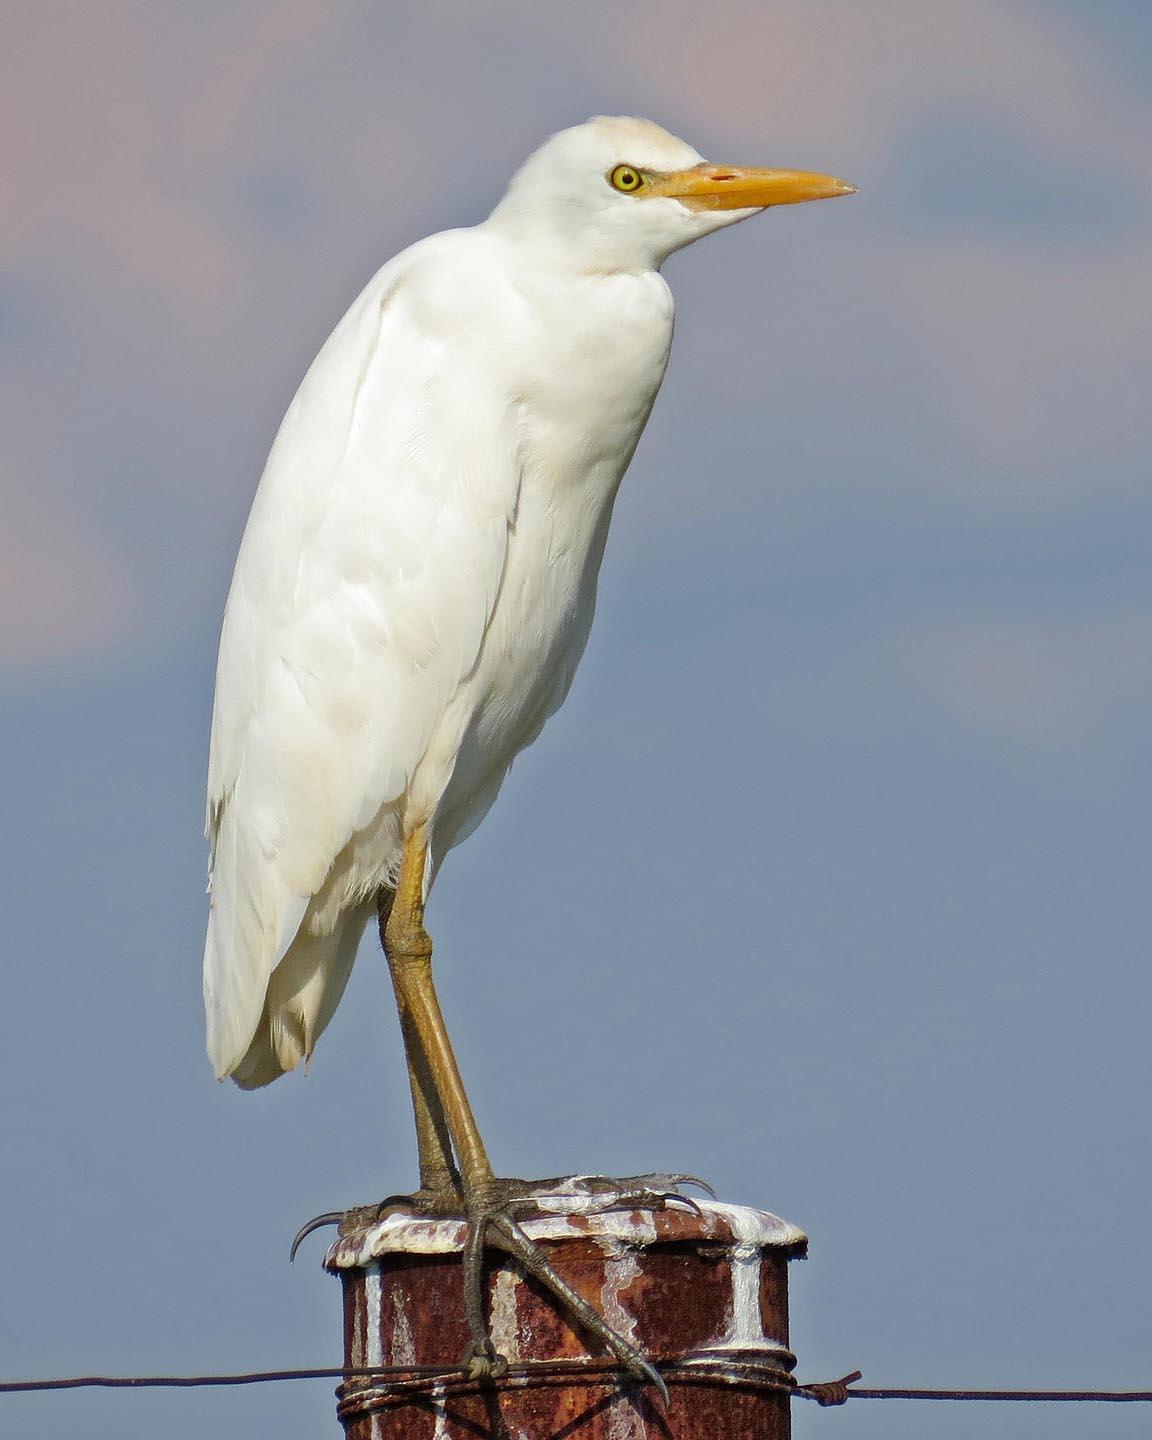 Cattle Egret Photo by Peter Boesman